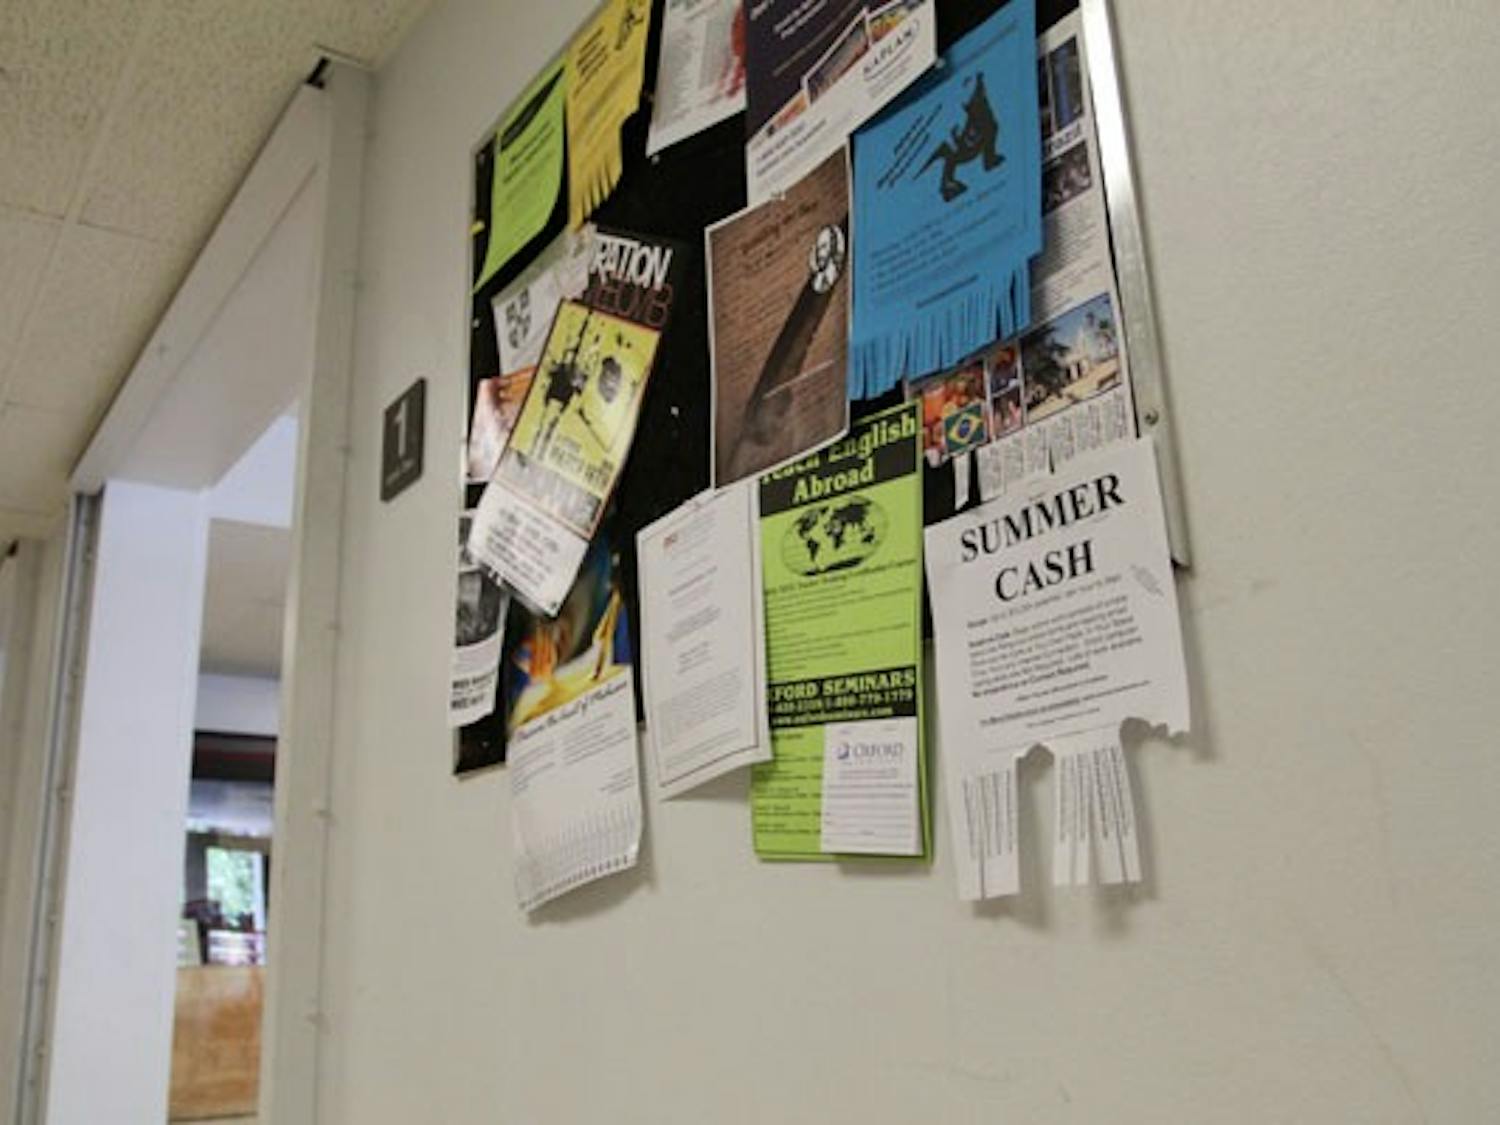 ODD JOBS: Billboards, such as ones at the Homer G. Language and Literature building, are filled with flyers for full- and part-time jobs for students who want to earn extra cash over the summer. (Photo by Nikolai de Vera)